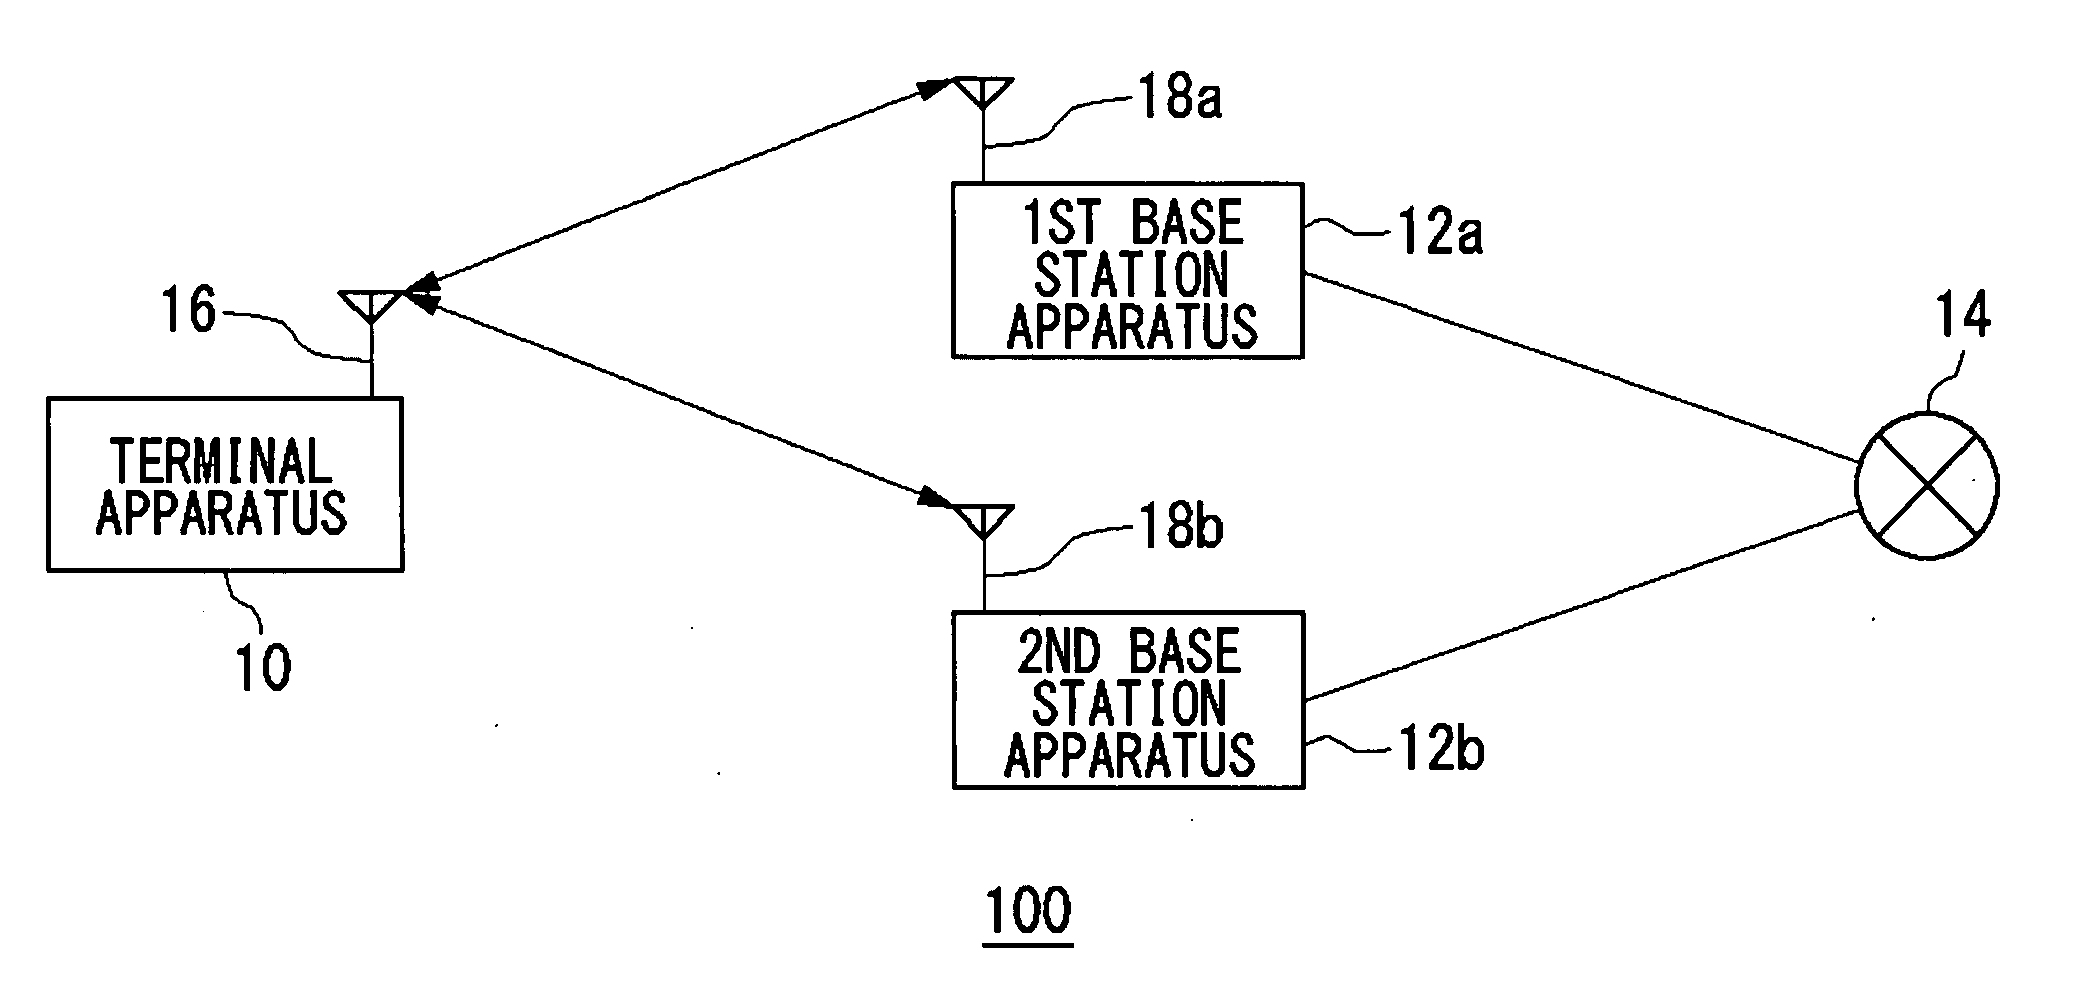 Method for controlling standby operations compatible with a plurality of wireless communication systems and method for performing operations compatible with a plurality of wireless communication systems